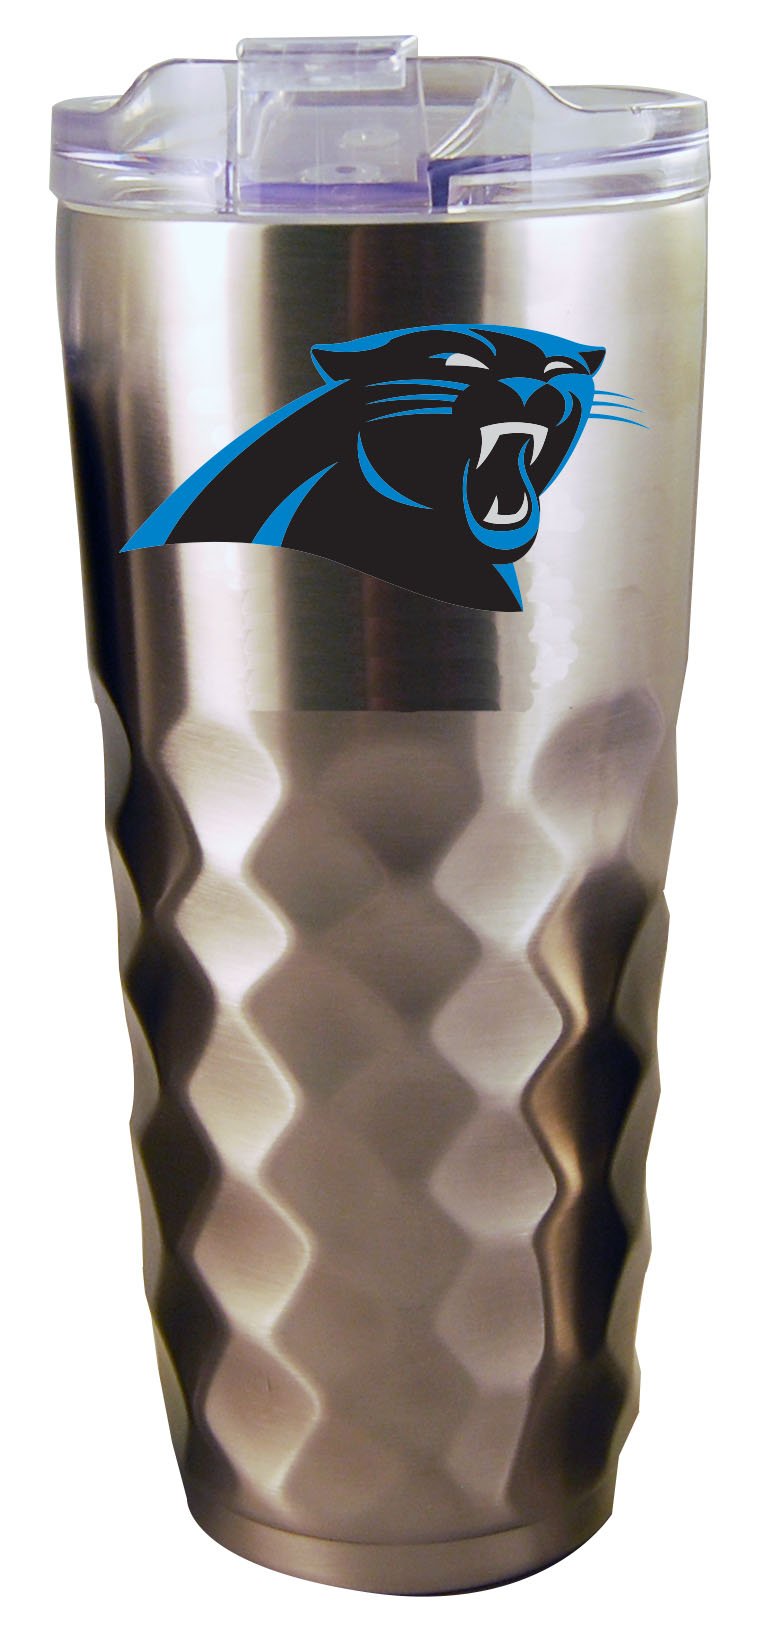 32oz Stainless Steel Diamond Tumbler | Carolina Panthers
Carolina Panthers, CPA, CurrentProduct, Drinkware_category_All, NFL
The Memory Company